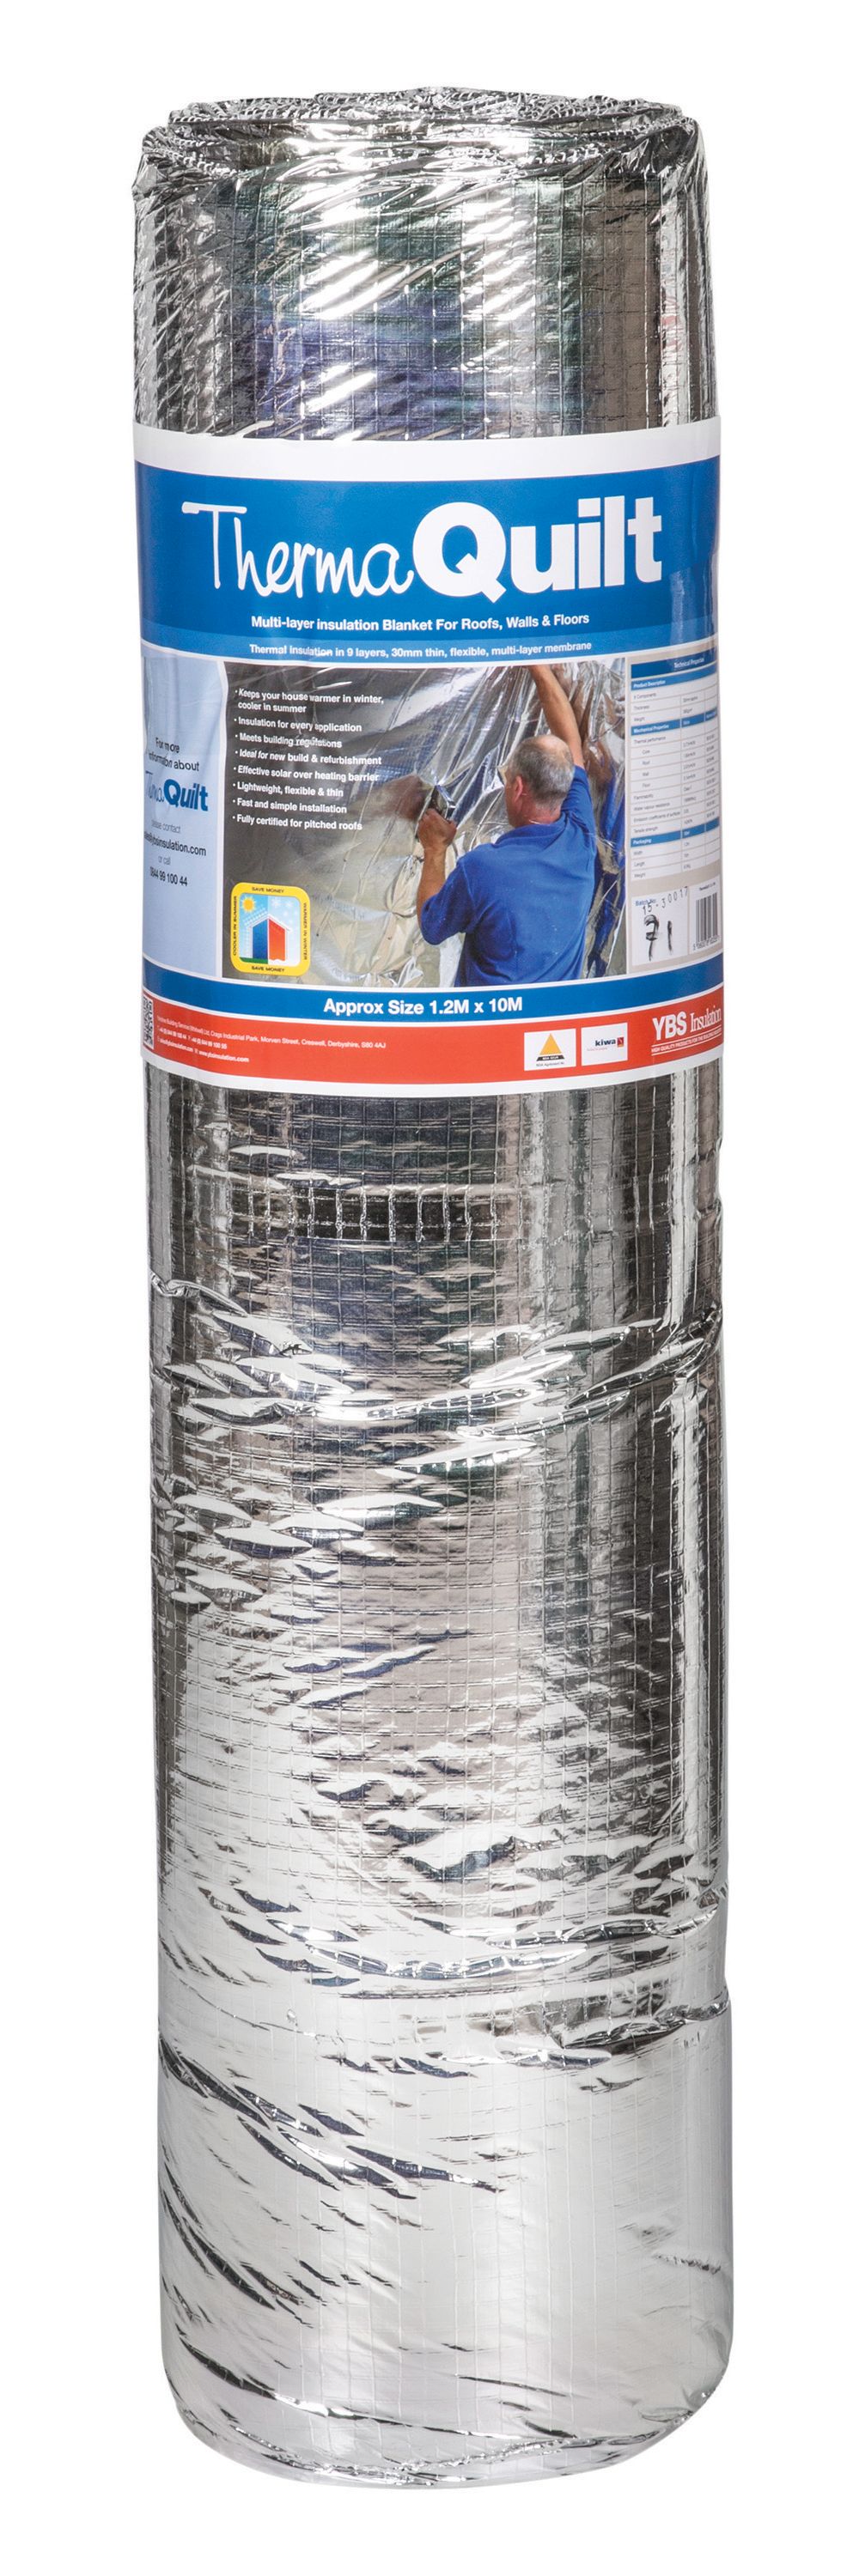 Image of YBS ThermaQuilt Multifoil 32mm Insulation Roll - 1.2 x 10m